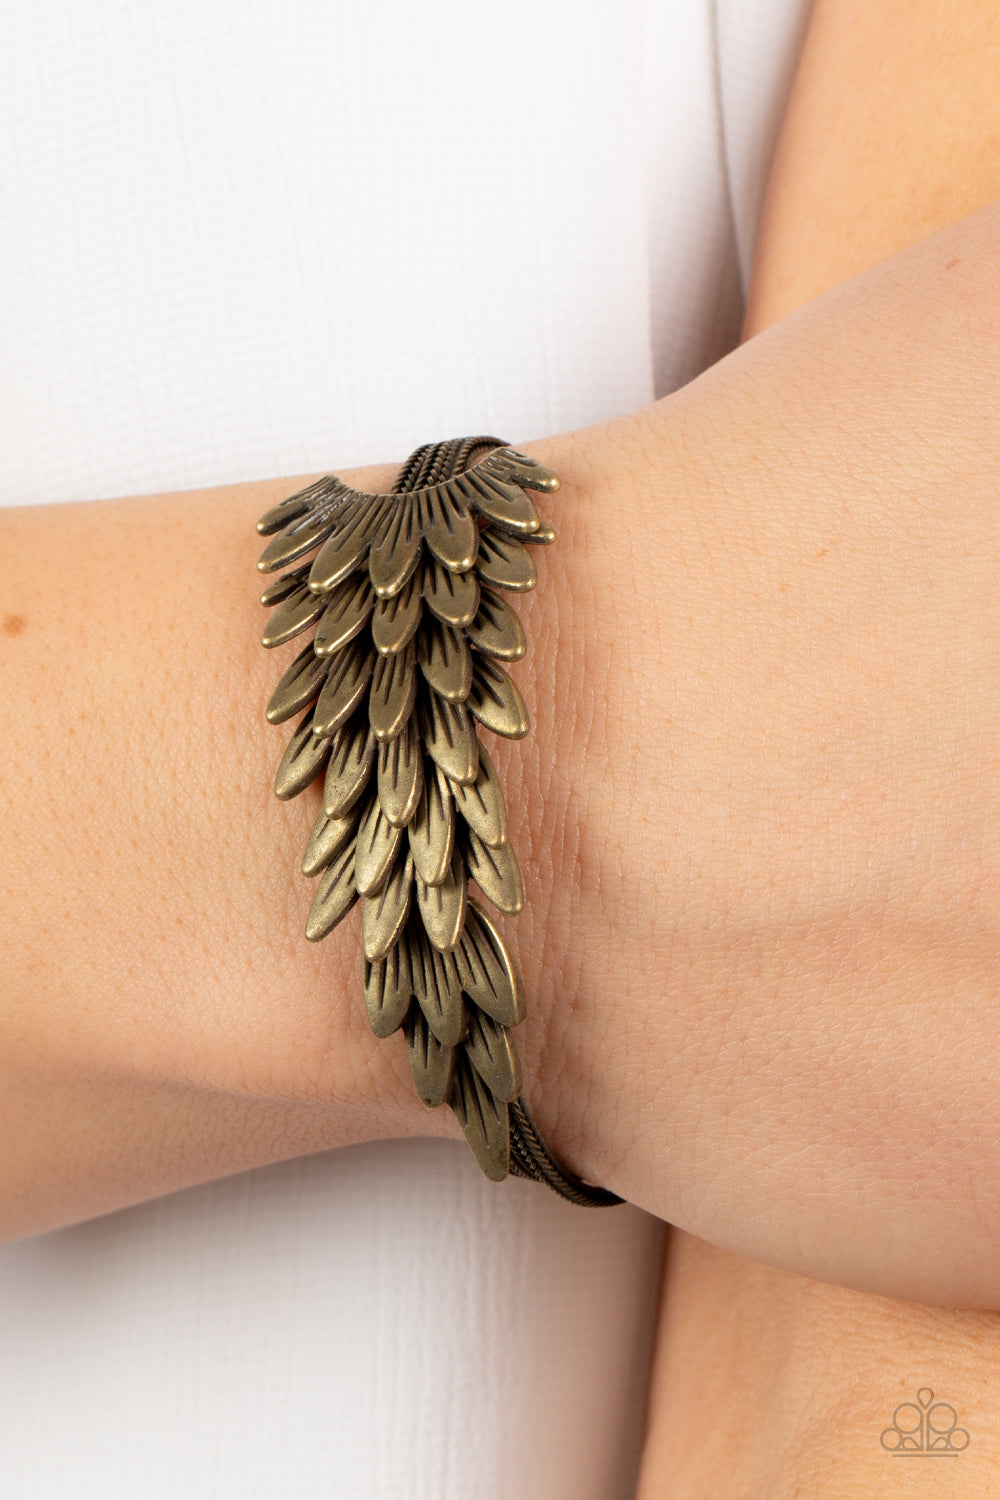 Feathery brass frames delicately overlap across the center of the wrist, creating a boa-like centerpiece atop rows of rustic brass chains. Features an adjustable clasp closure.